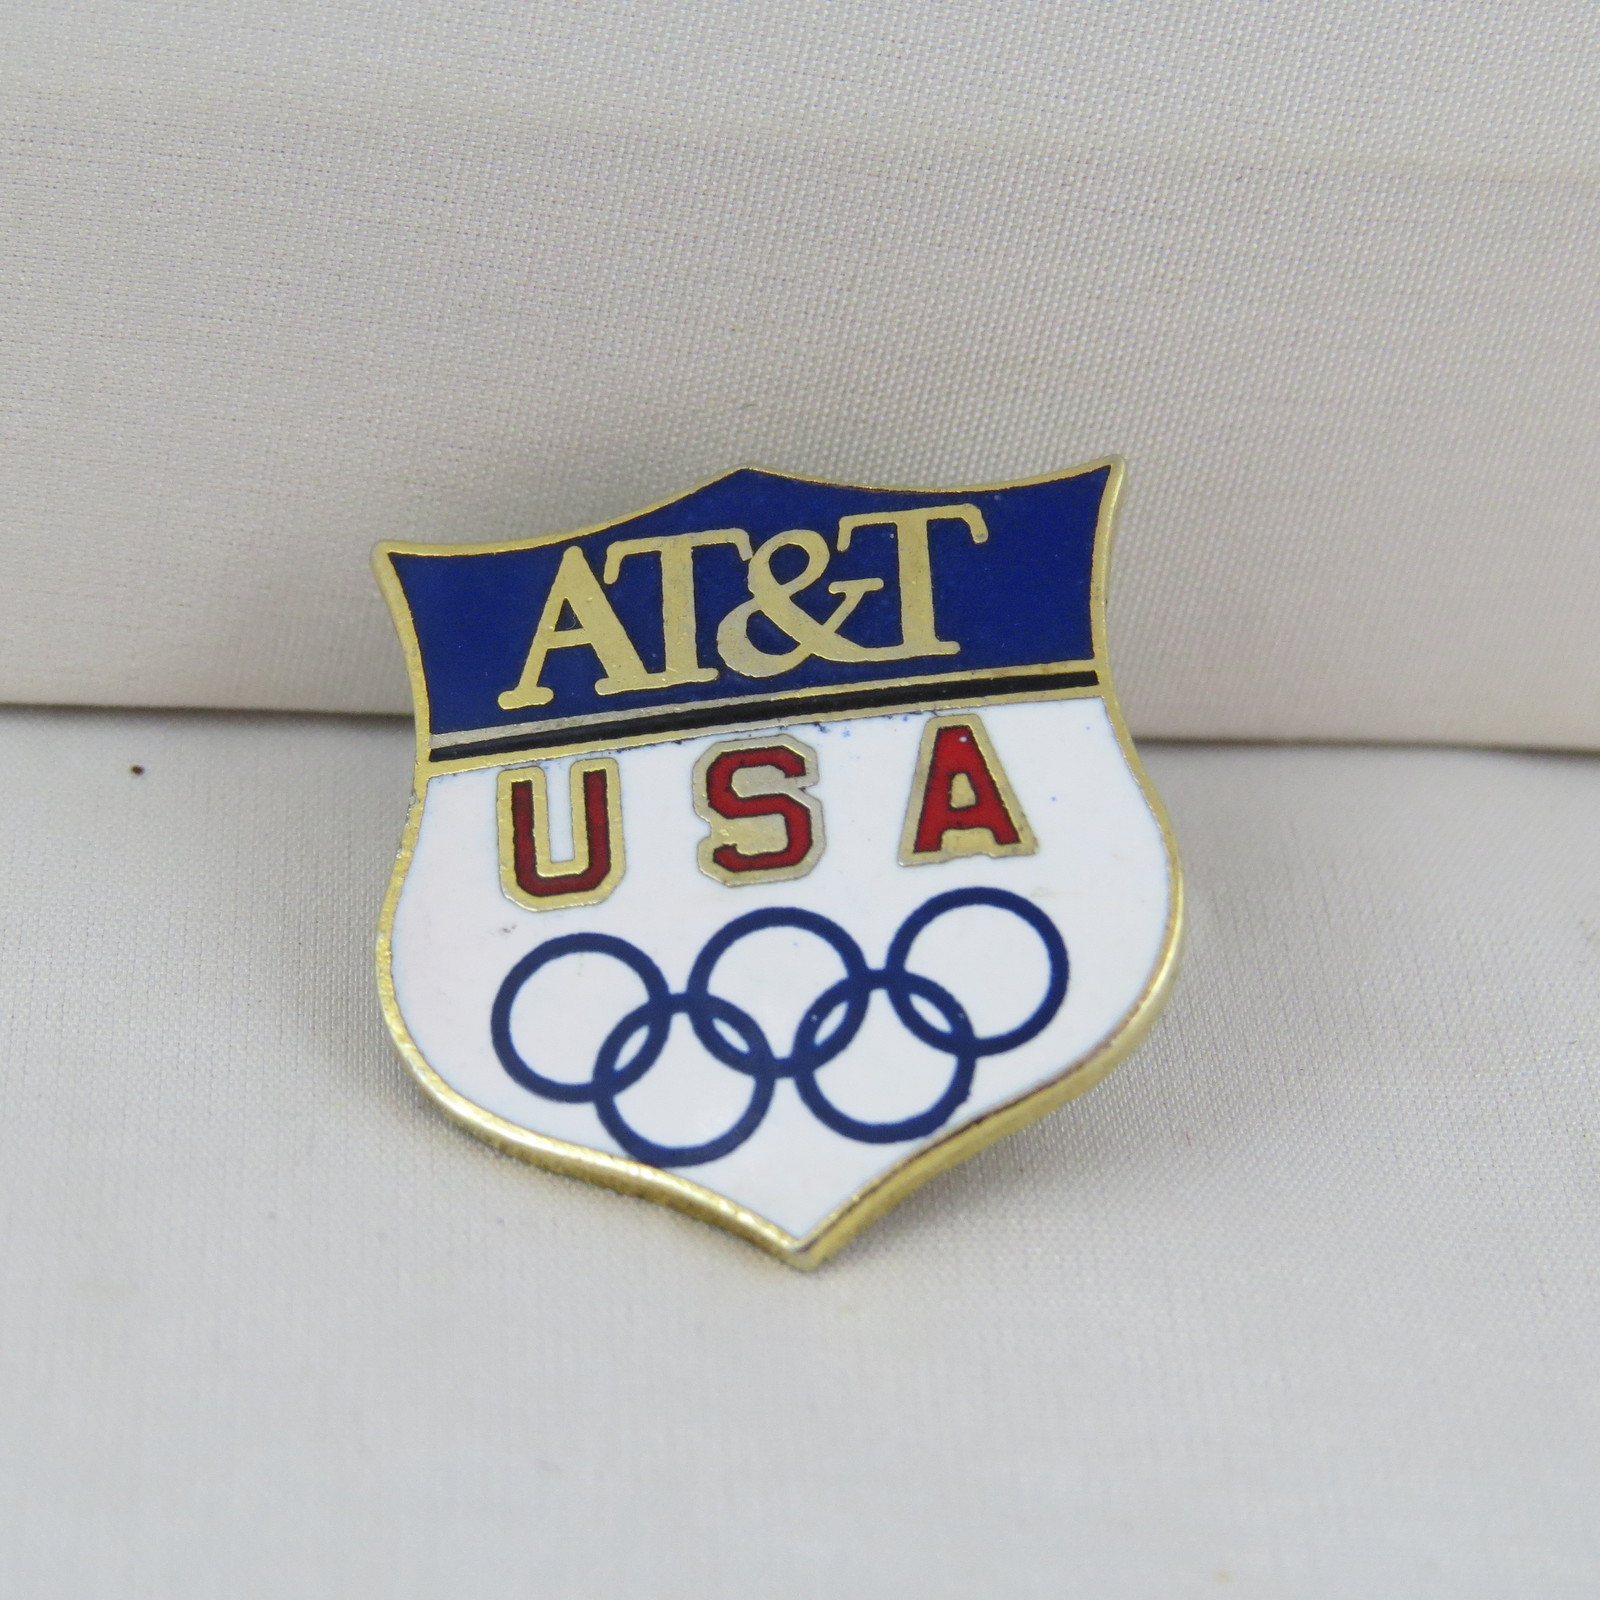 Primary image for 1988 Winter Olympic Games Pin - Team USA - AT&T Sponsor Pin - Shield Design